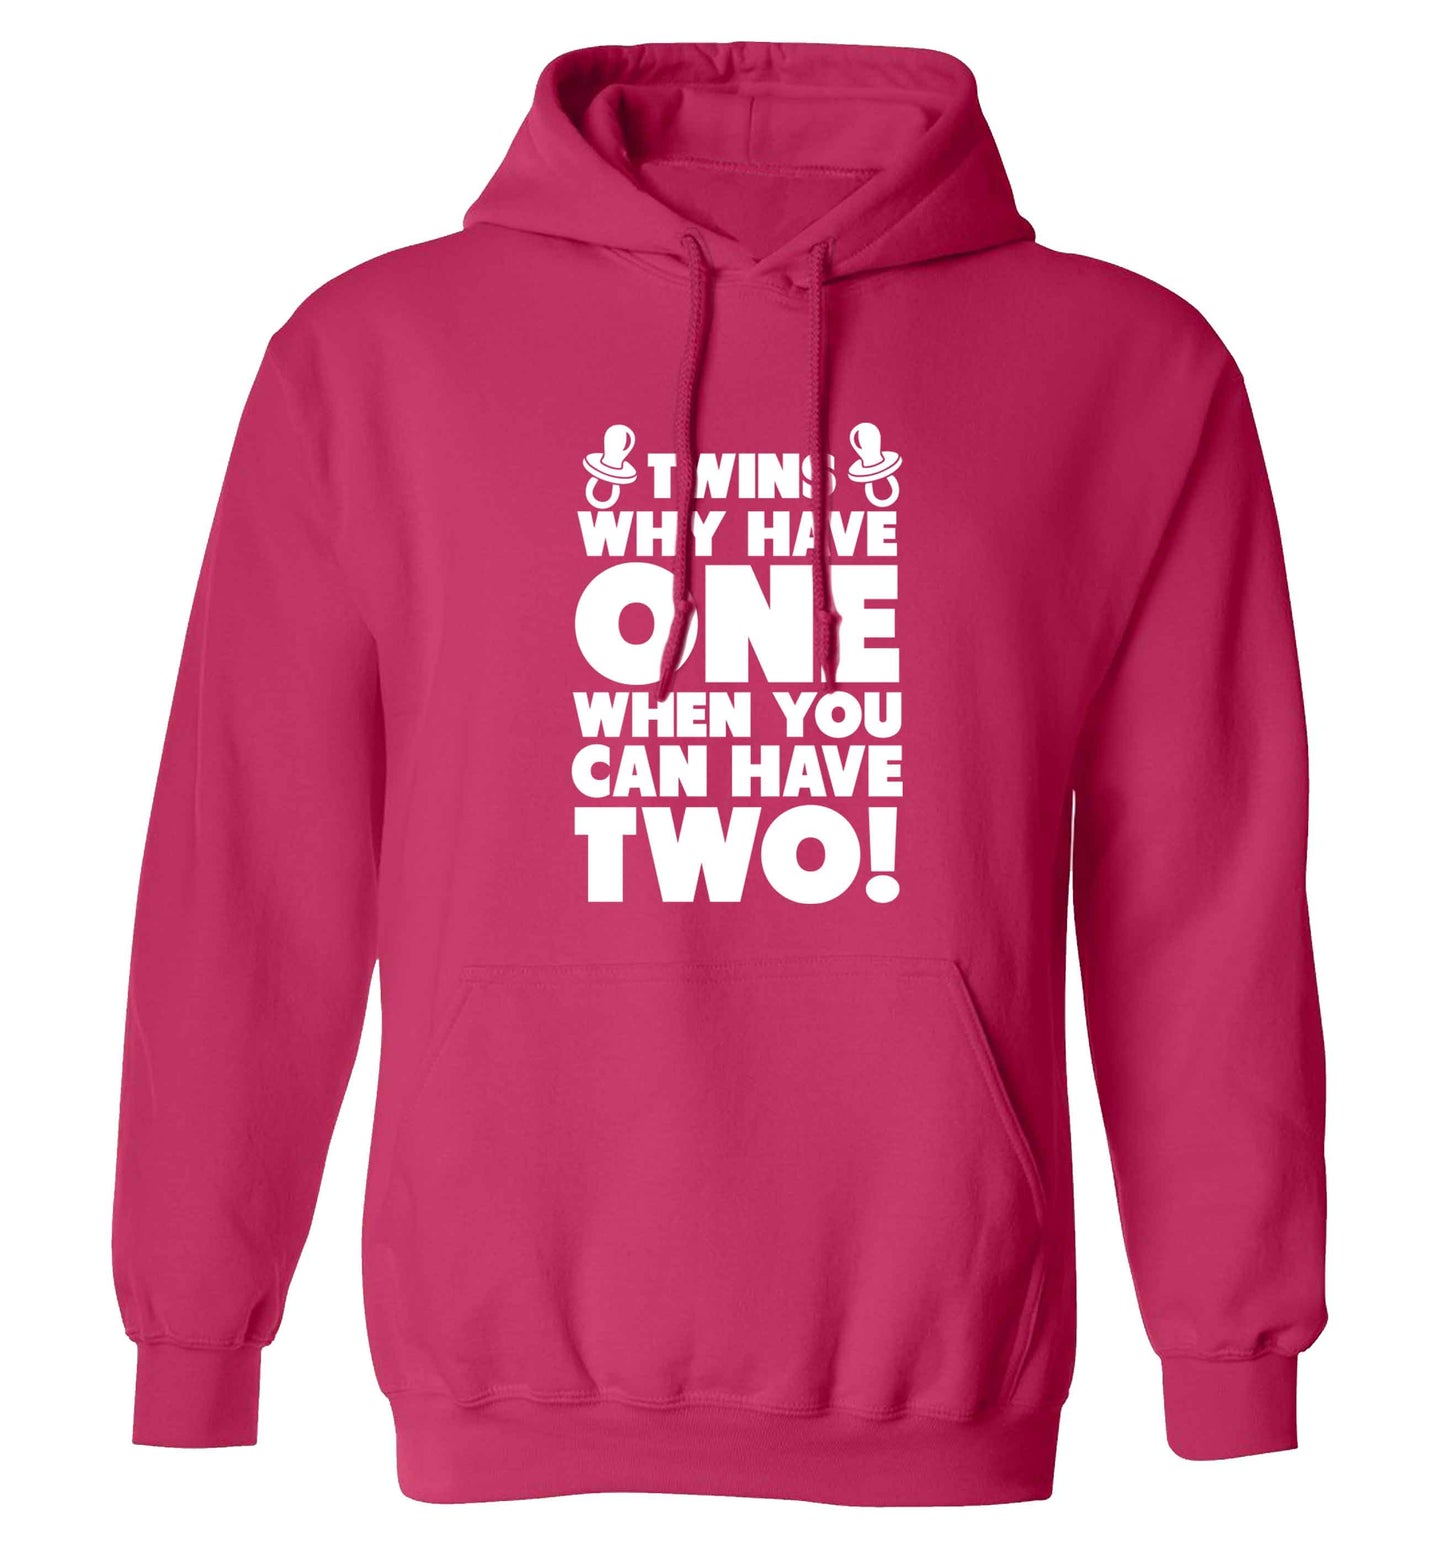 Twins why have one when you can have two adults unisex pink hoodie 2XL